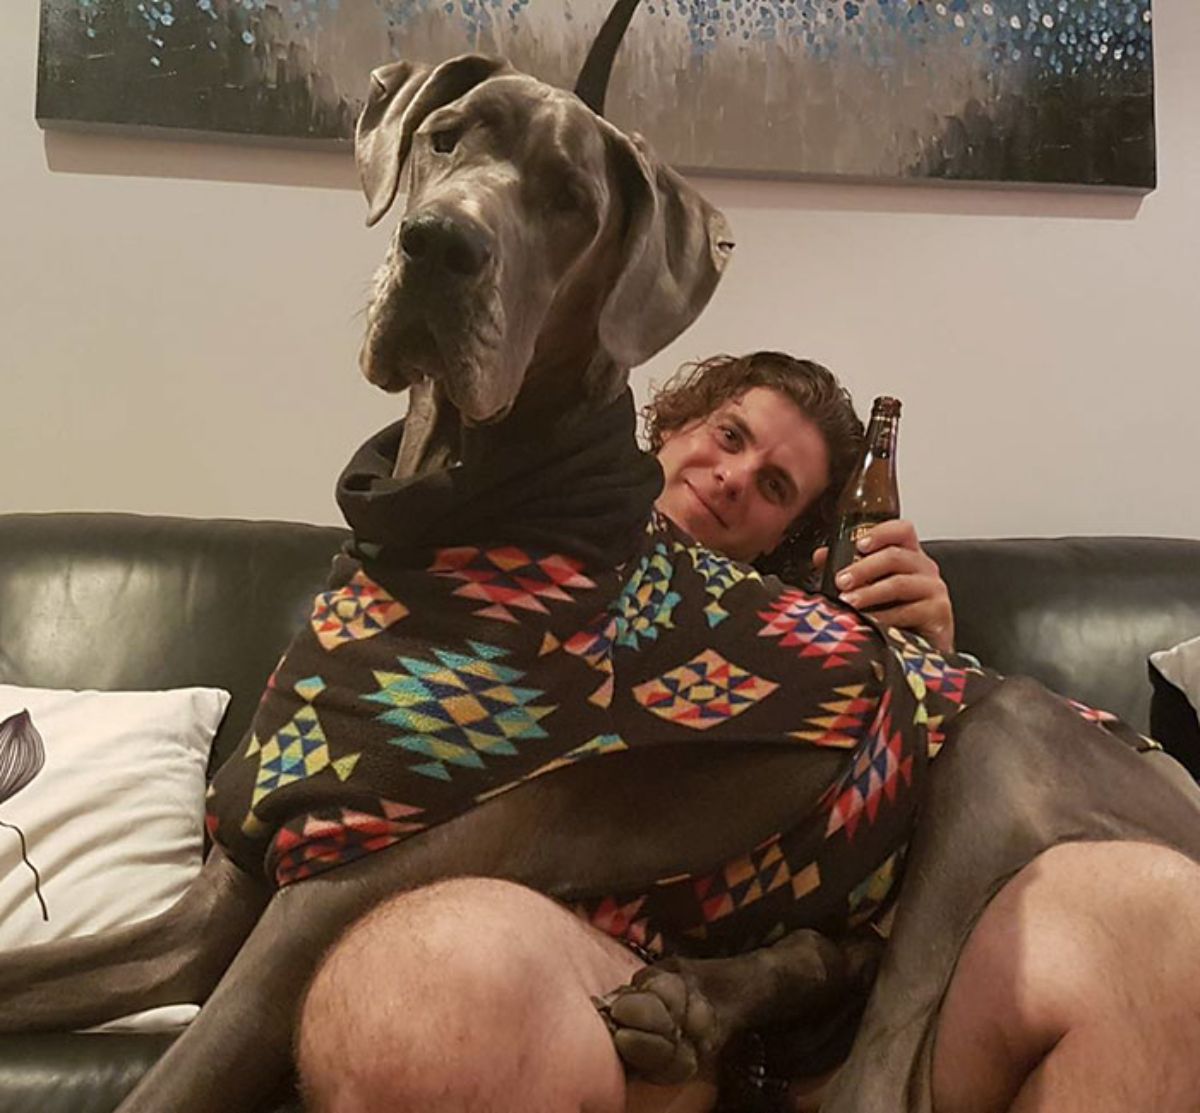 grey great dane in a colourful sweater laying across a man's lap